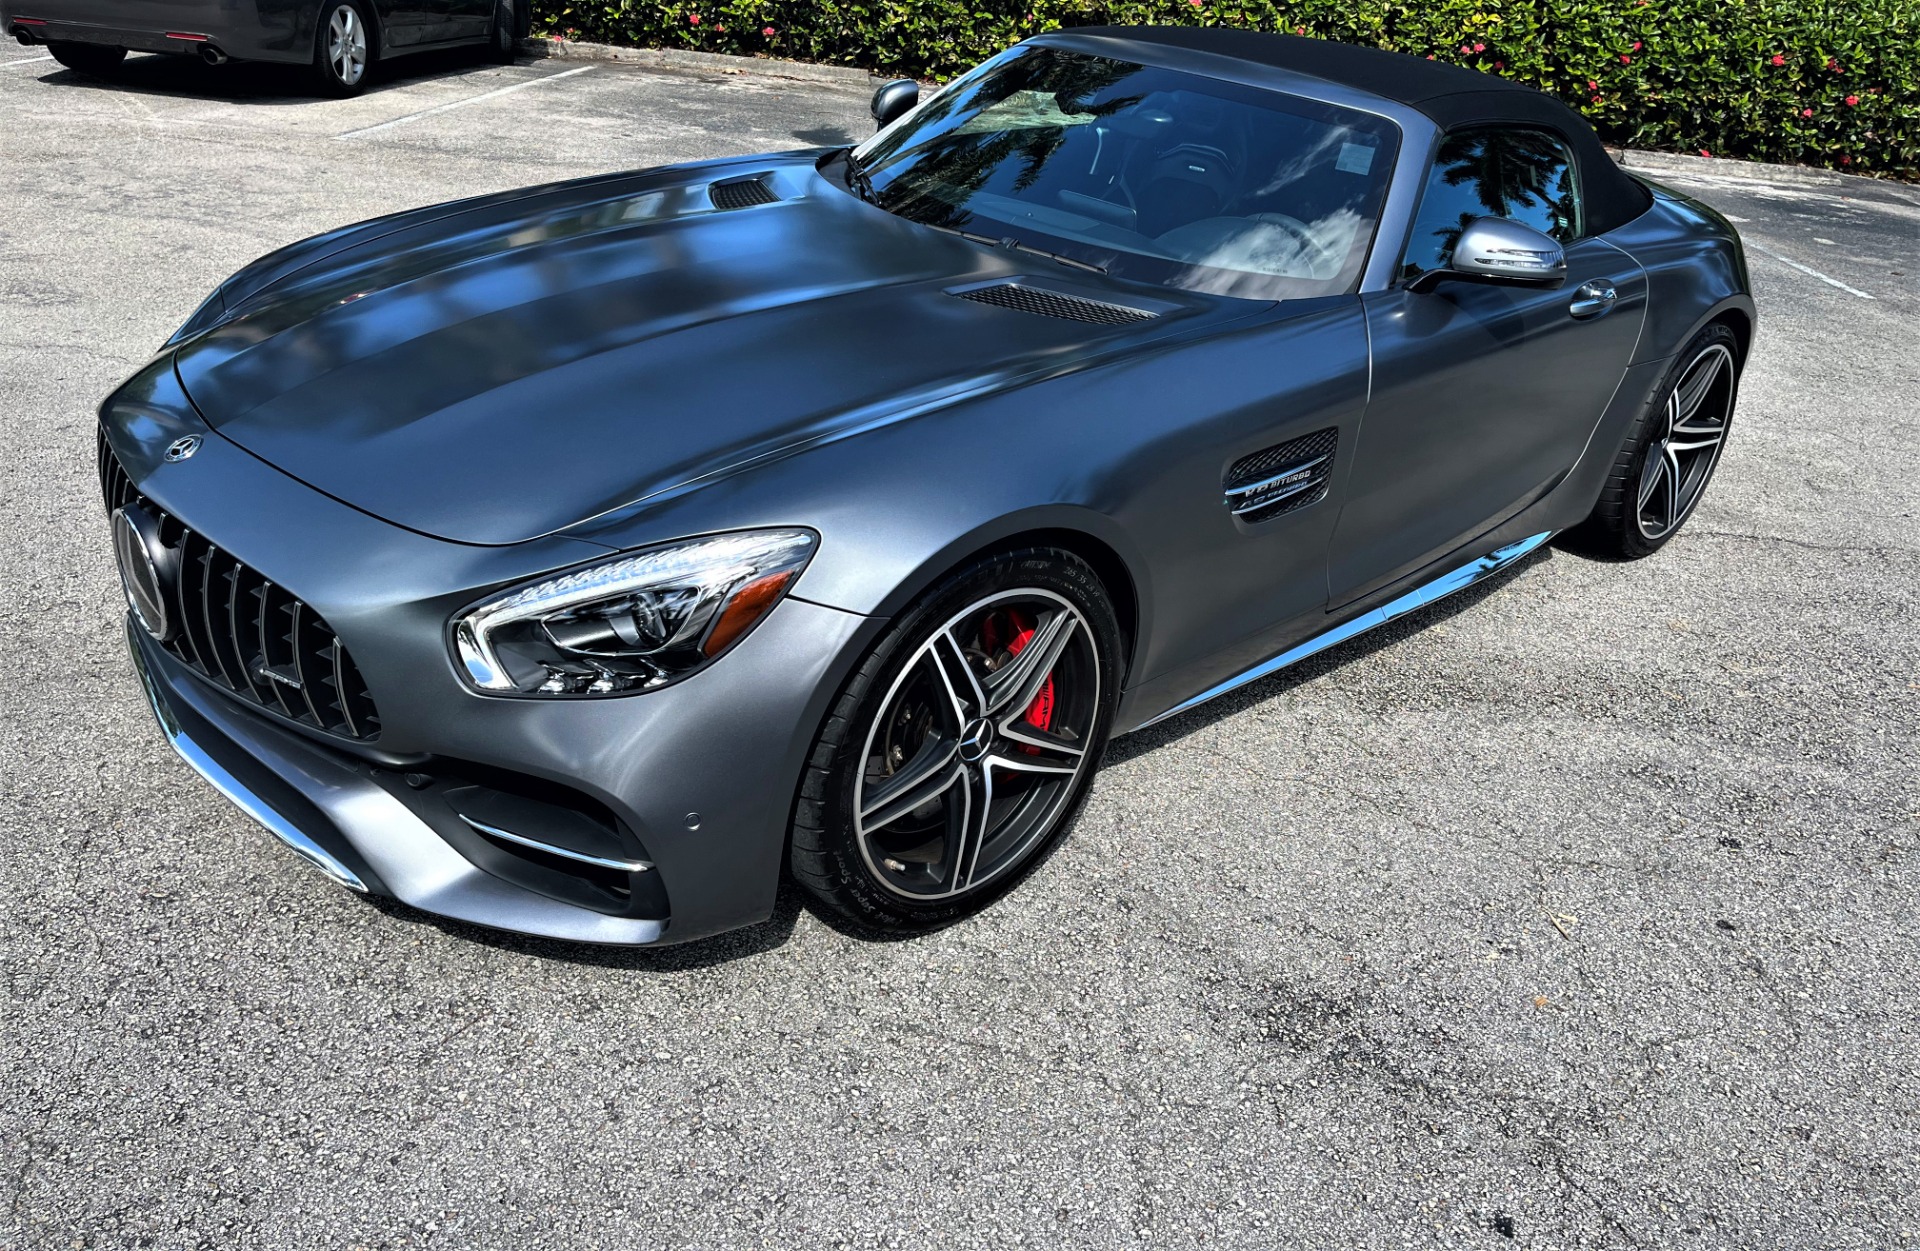 Used 2018 Mercedes-Benz AMG GT C for sale Sold at The Gables Sports Cars in Miami FL 33146 1